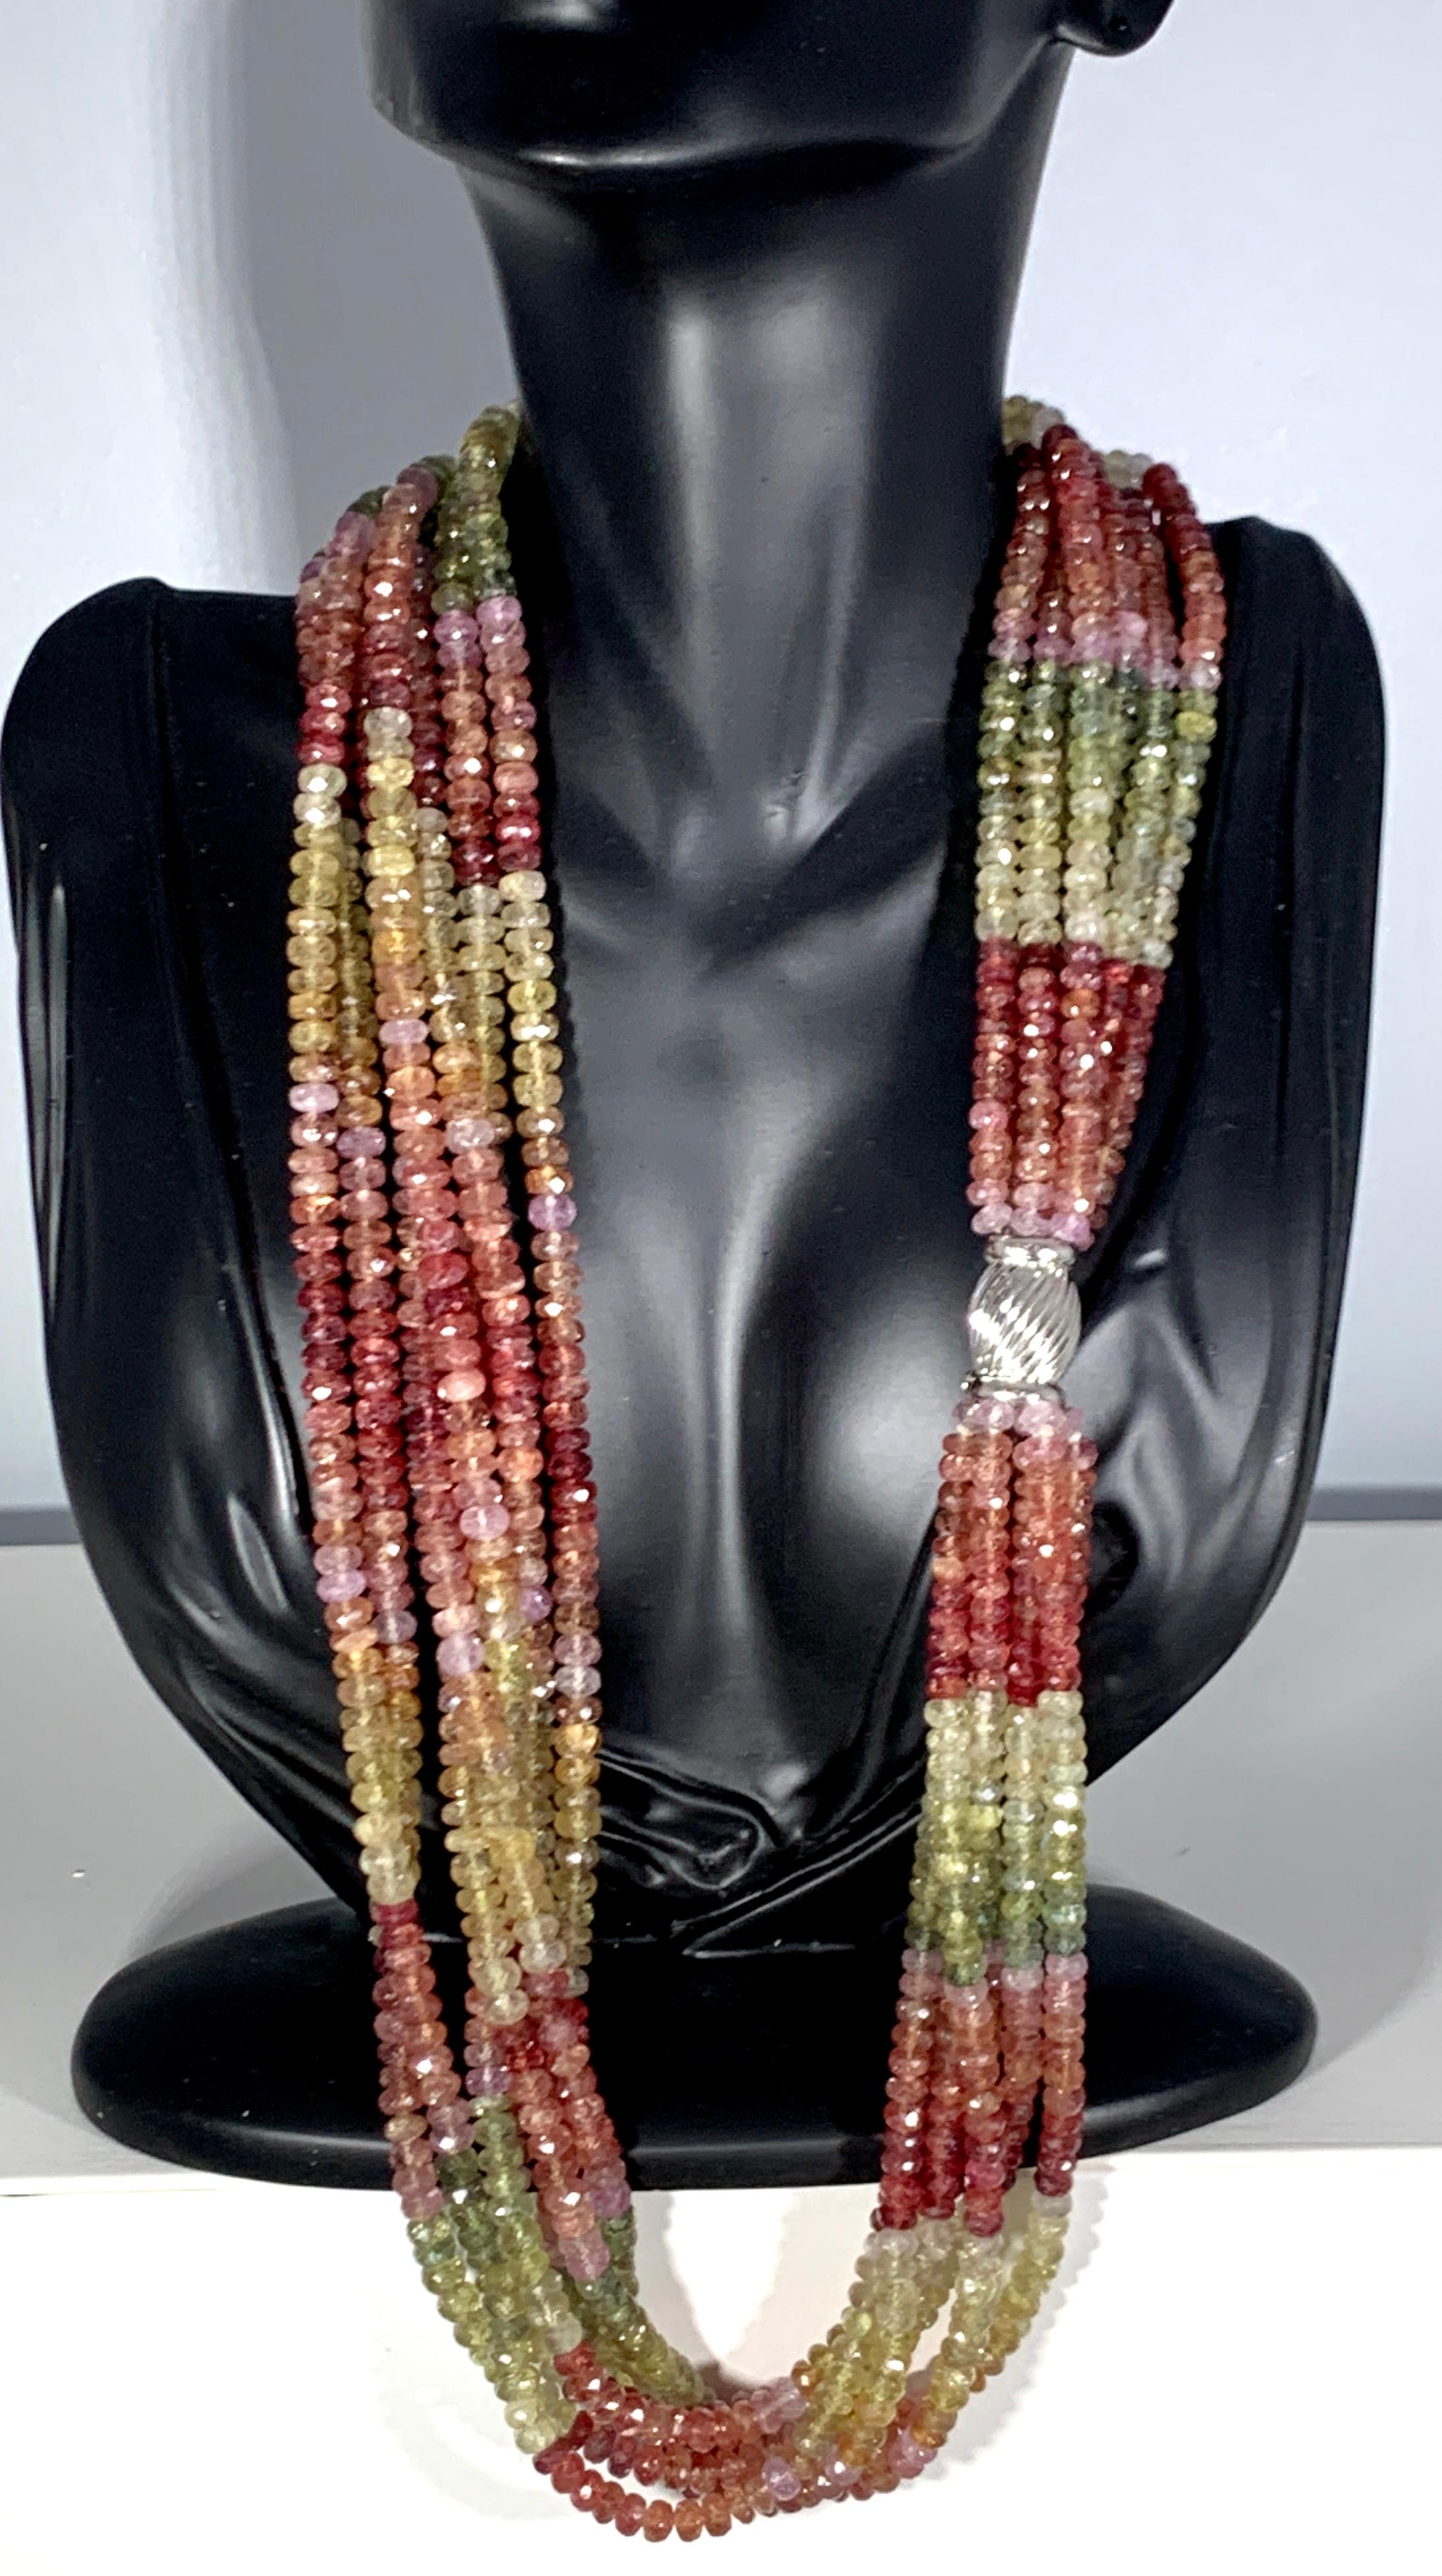 2500 Carat 7 Layer Natural Multi Sapphire Fine Bead Necklace 18 Karat Gold Clasp In Excellent Condition For Sale In New York, NY